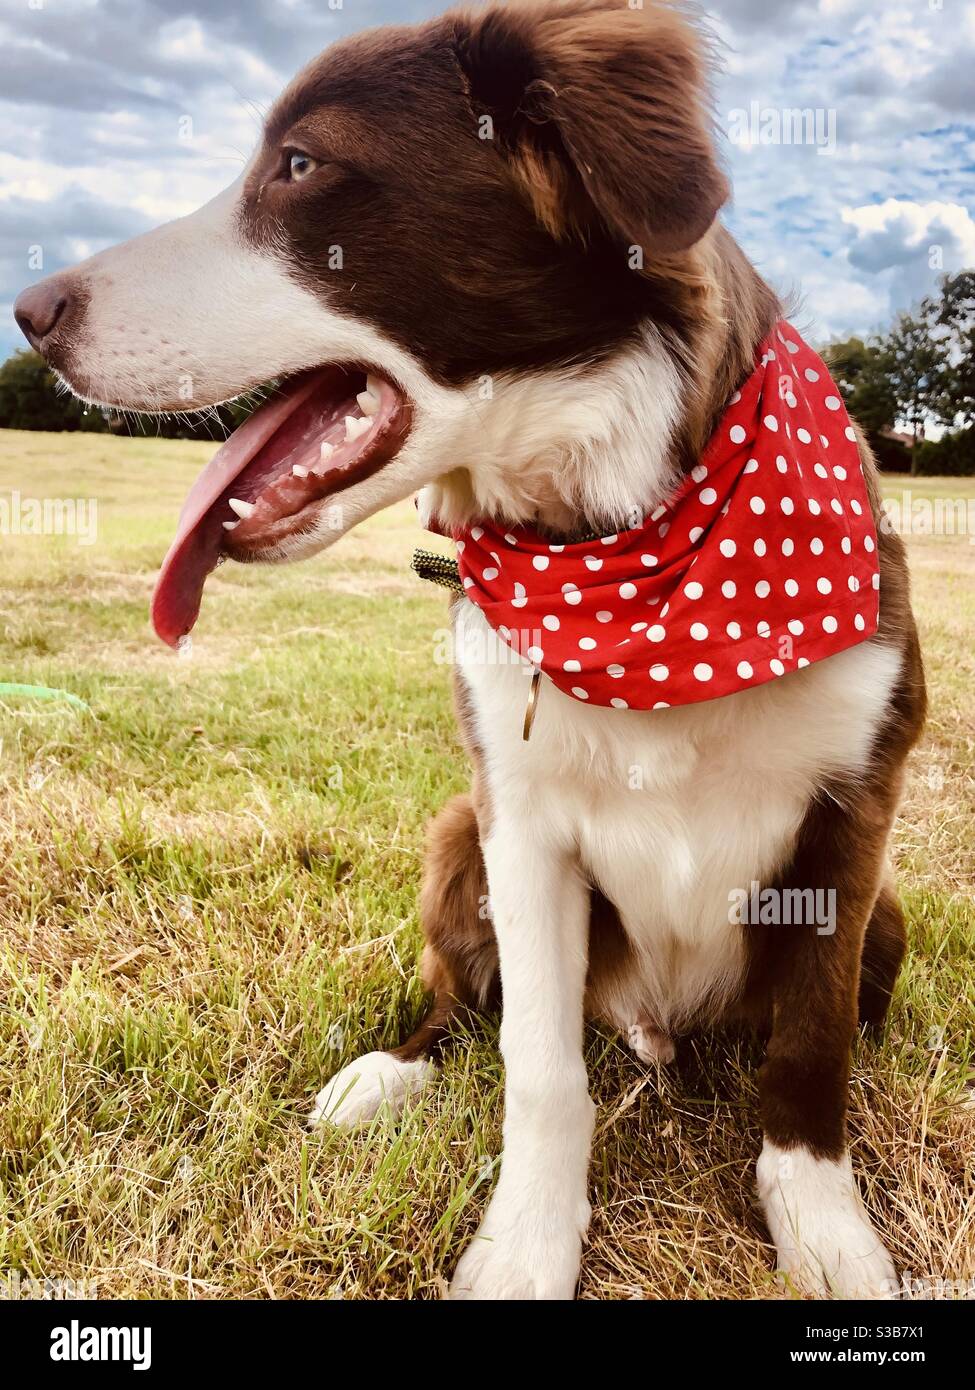 Border collie dog in red bandana in a field Stock Photo